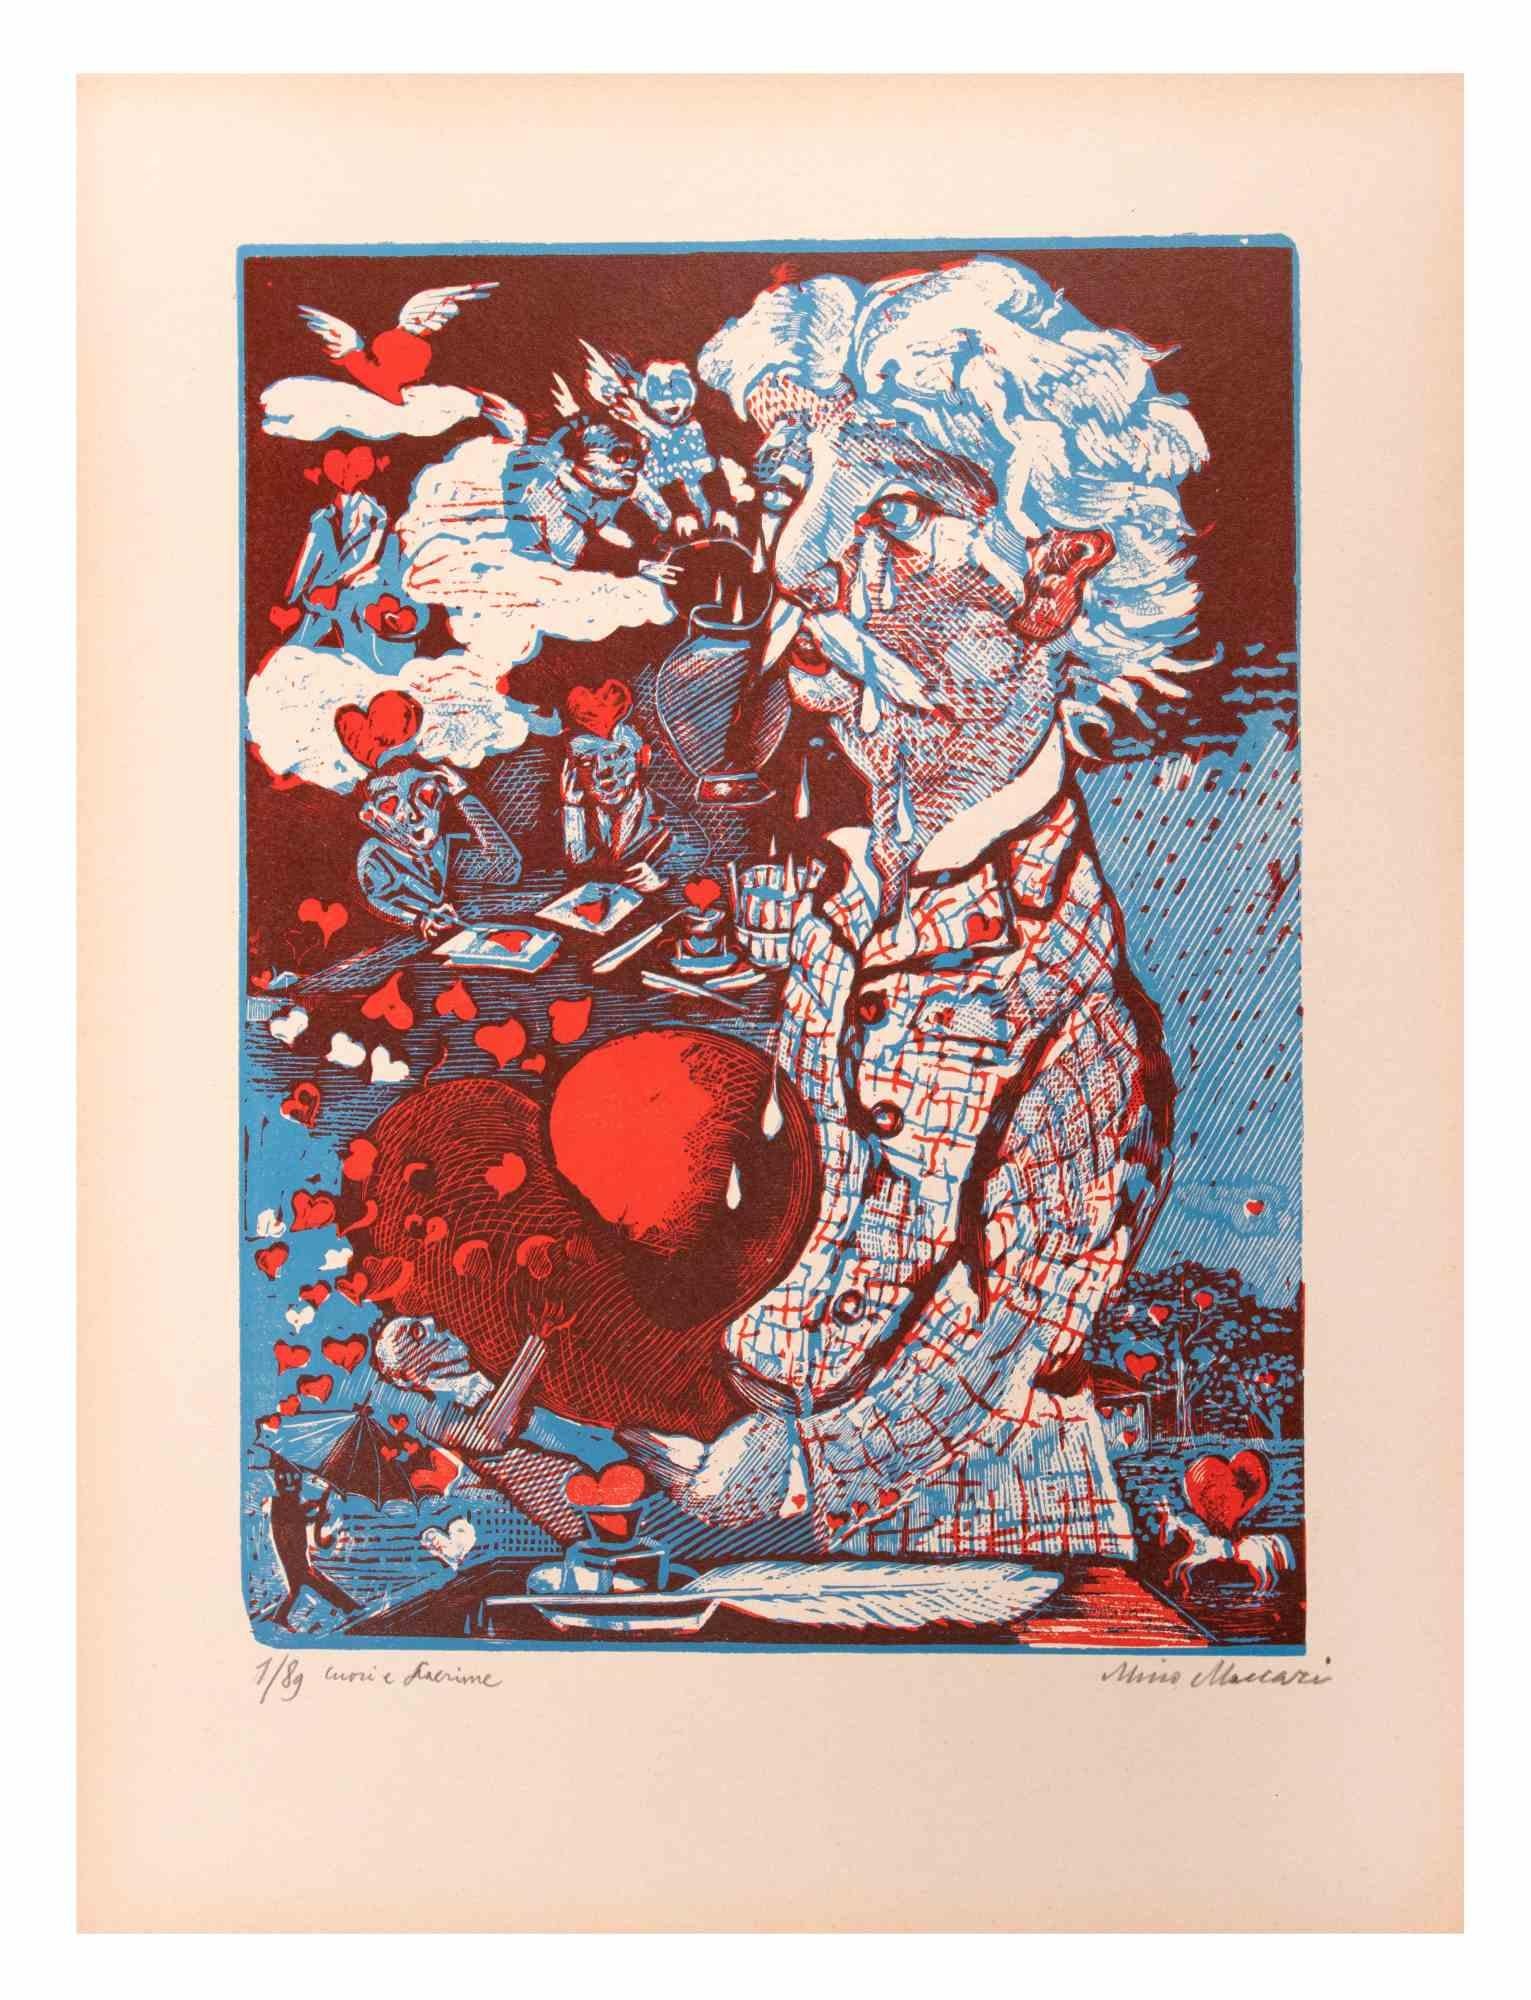 Cuori e Lacrime is an Artwork realized by Mino Maccari  (1924-1989) in the Mid-20th Century.

Colored woodcut on paper. Hand-signed on the lower, numbered 1/89 specimens and titled on the left margin.

Good conditions.

Mino Maccari (Siena,